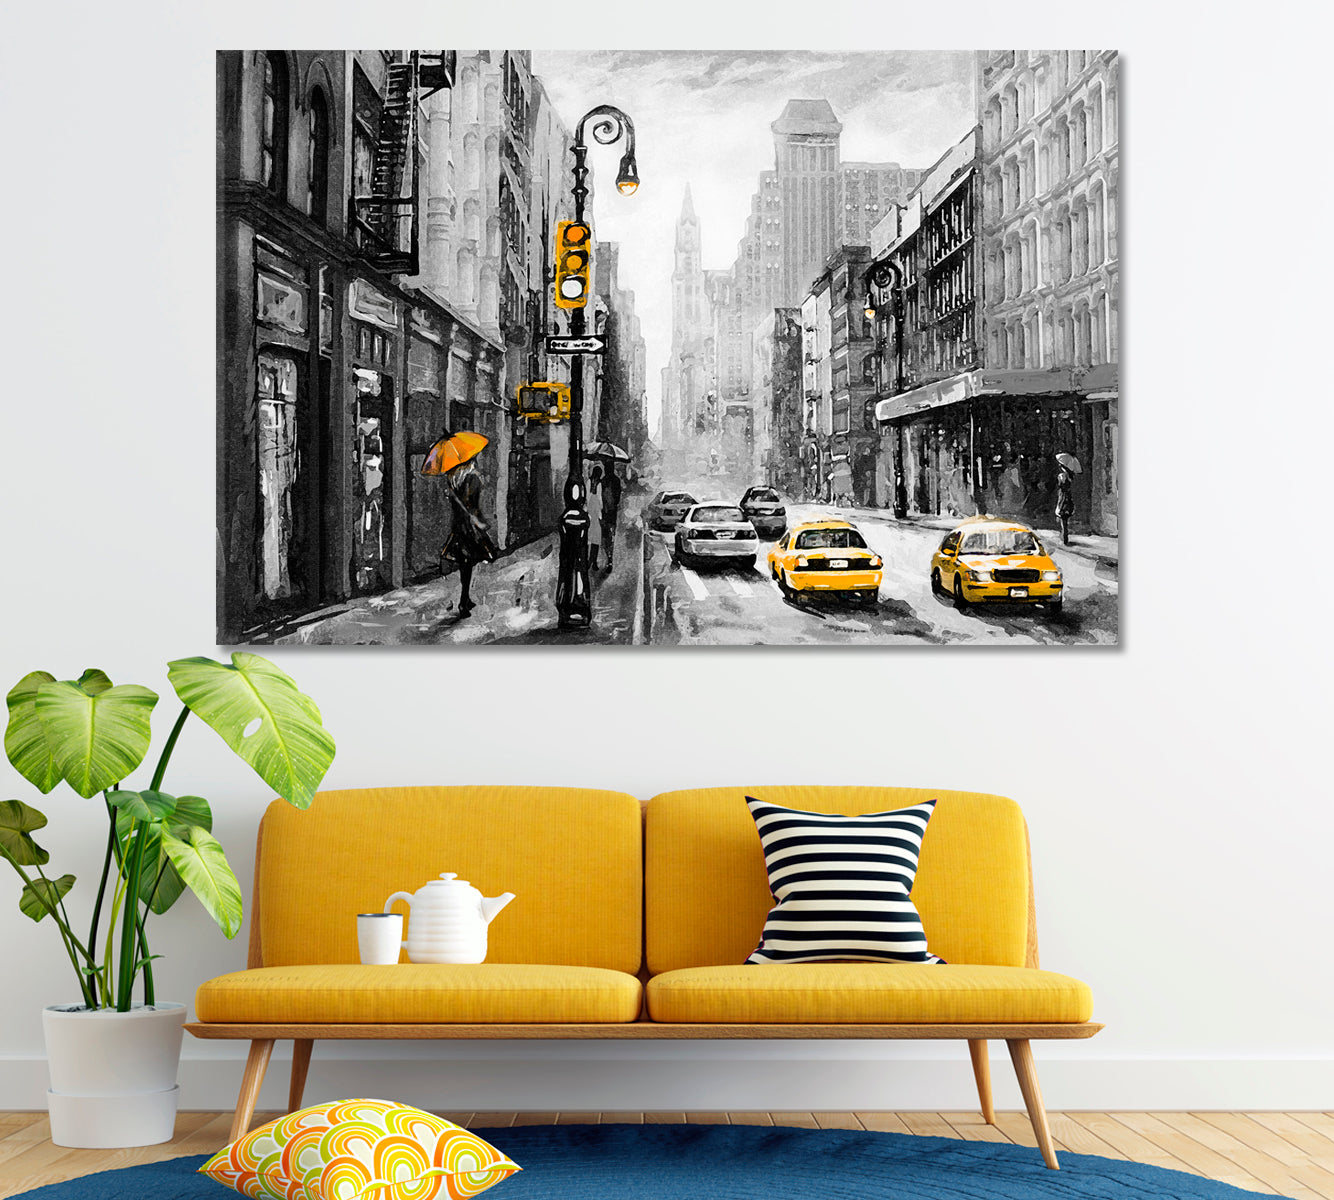 New York with Yellow Taxi Canvas Print ArtLexy 1 Panel 24"x16" inches 